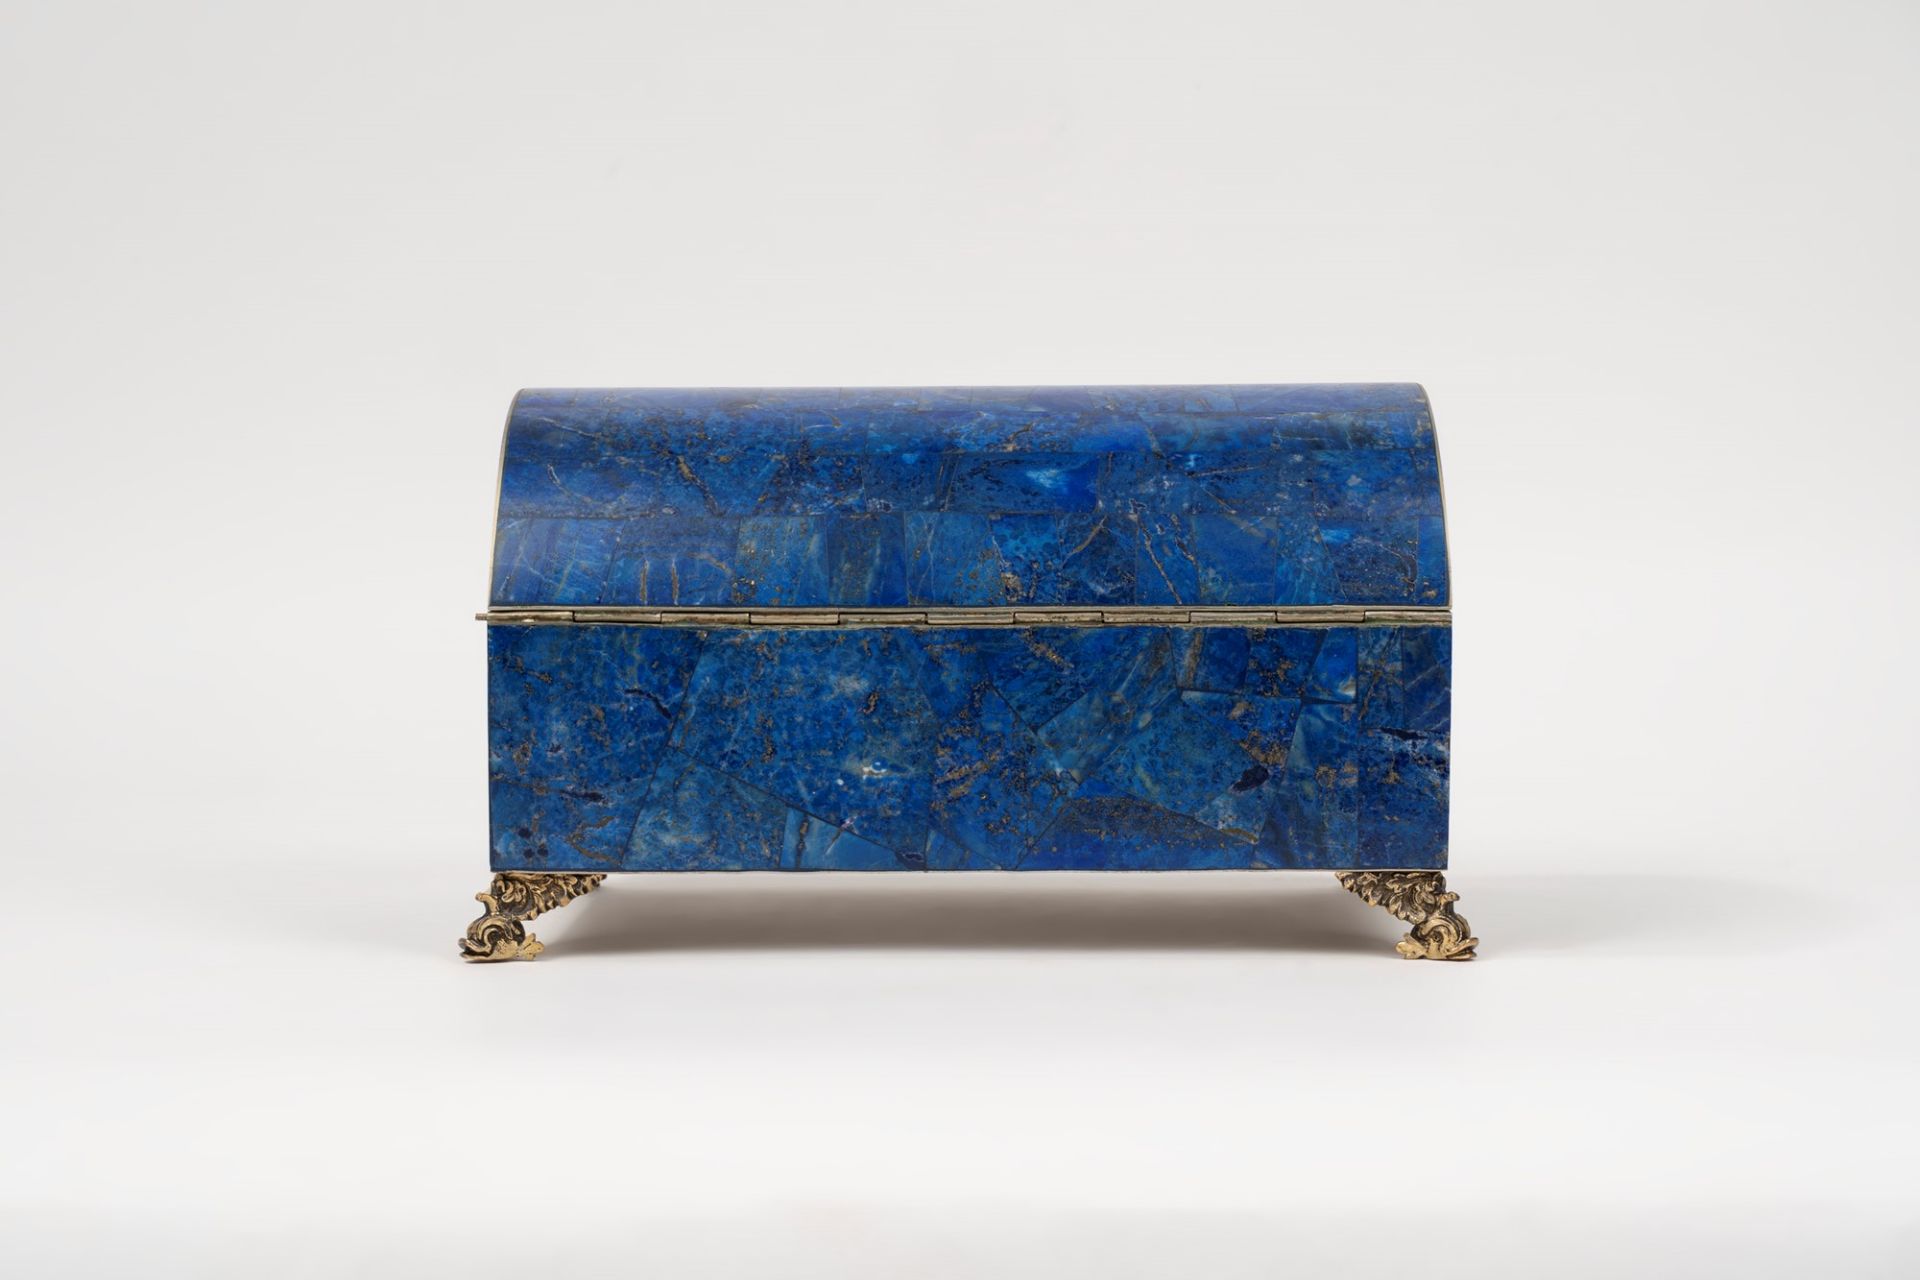 Box in lapis lazuli and gilded bronze, 20th century - Image 2 of 3